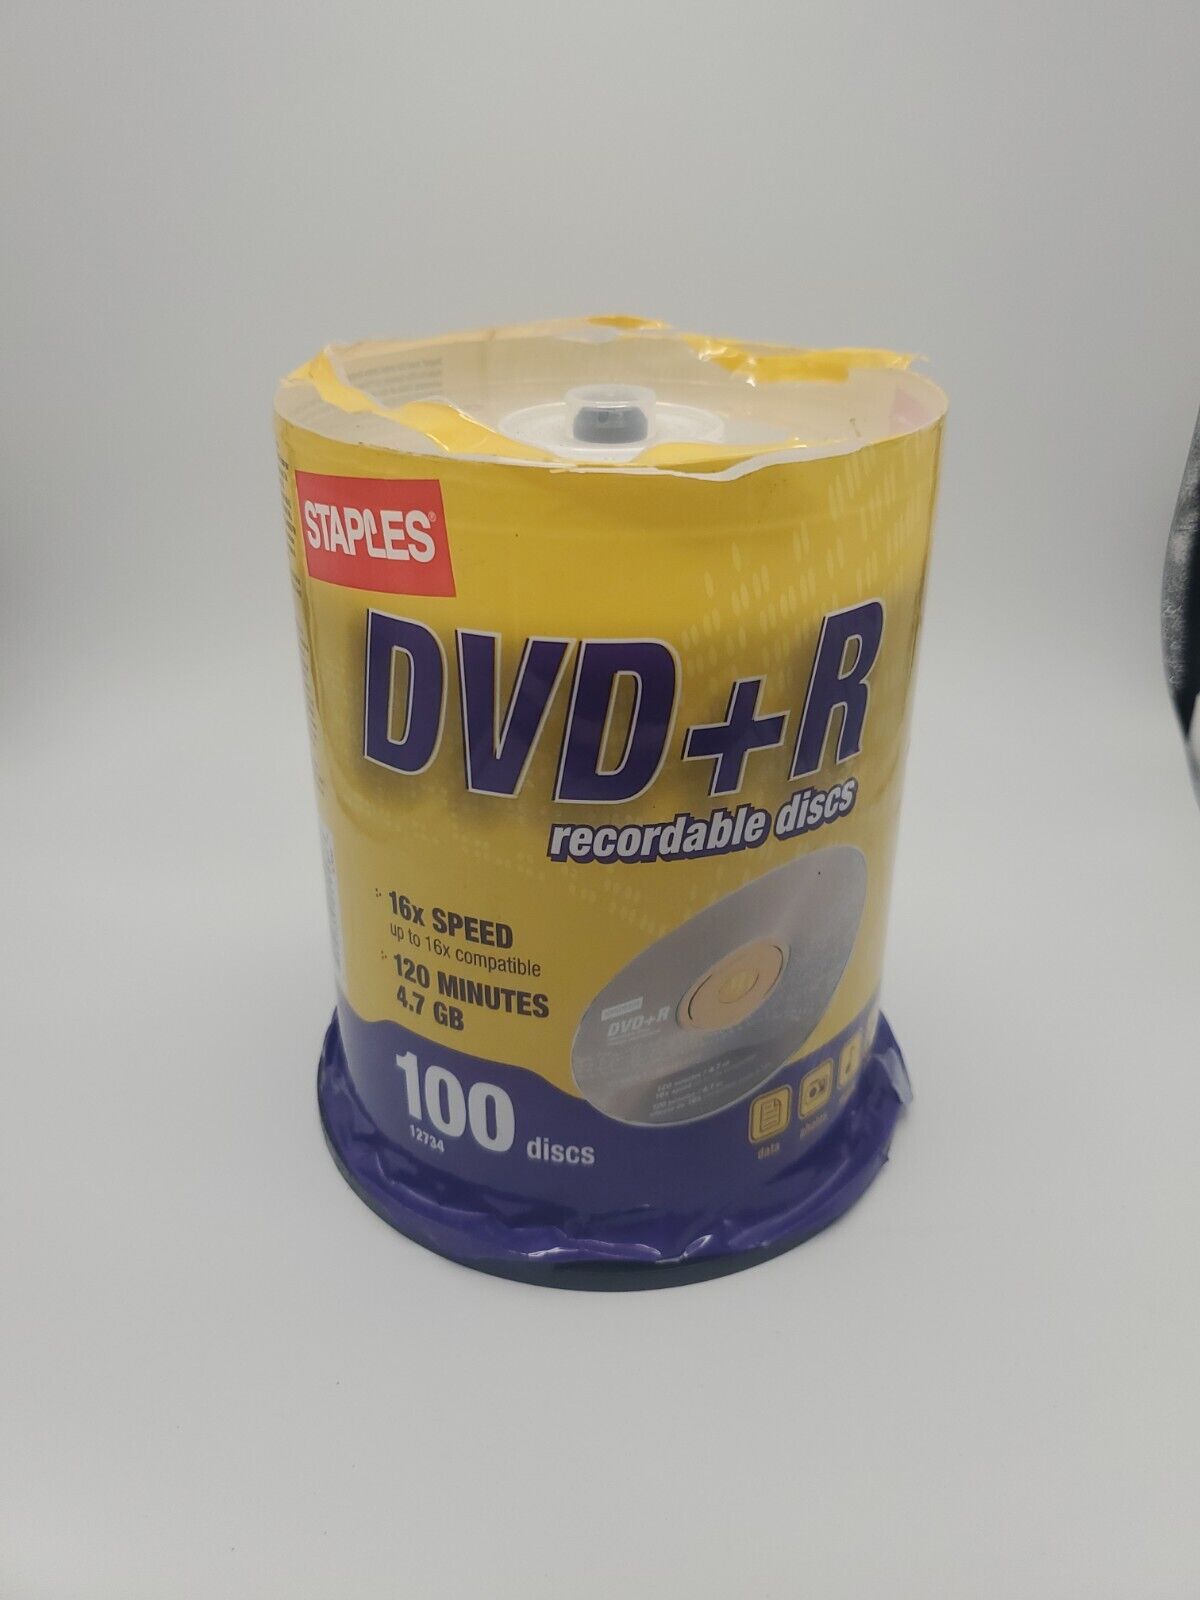 1 Staples 100 ct pc Spindle Pack 4.7GB DVD+R 120min16X Dammaged Seal